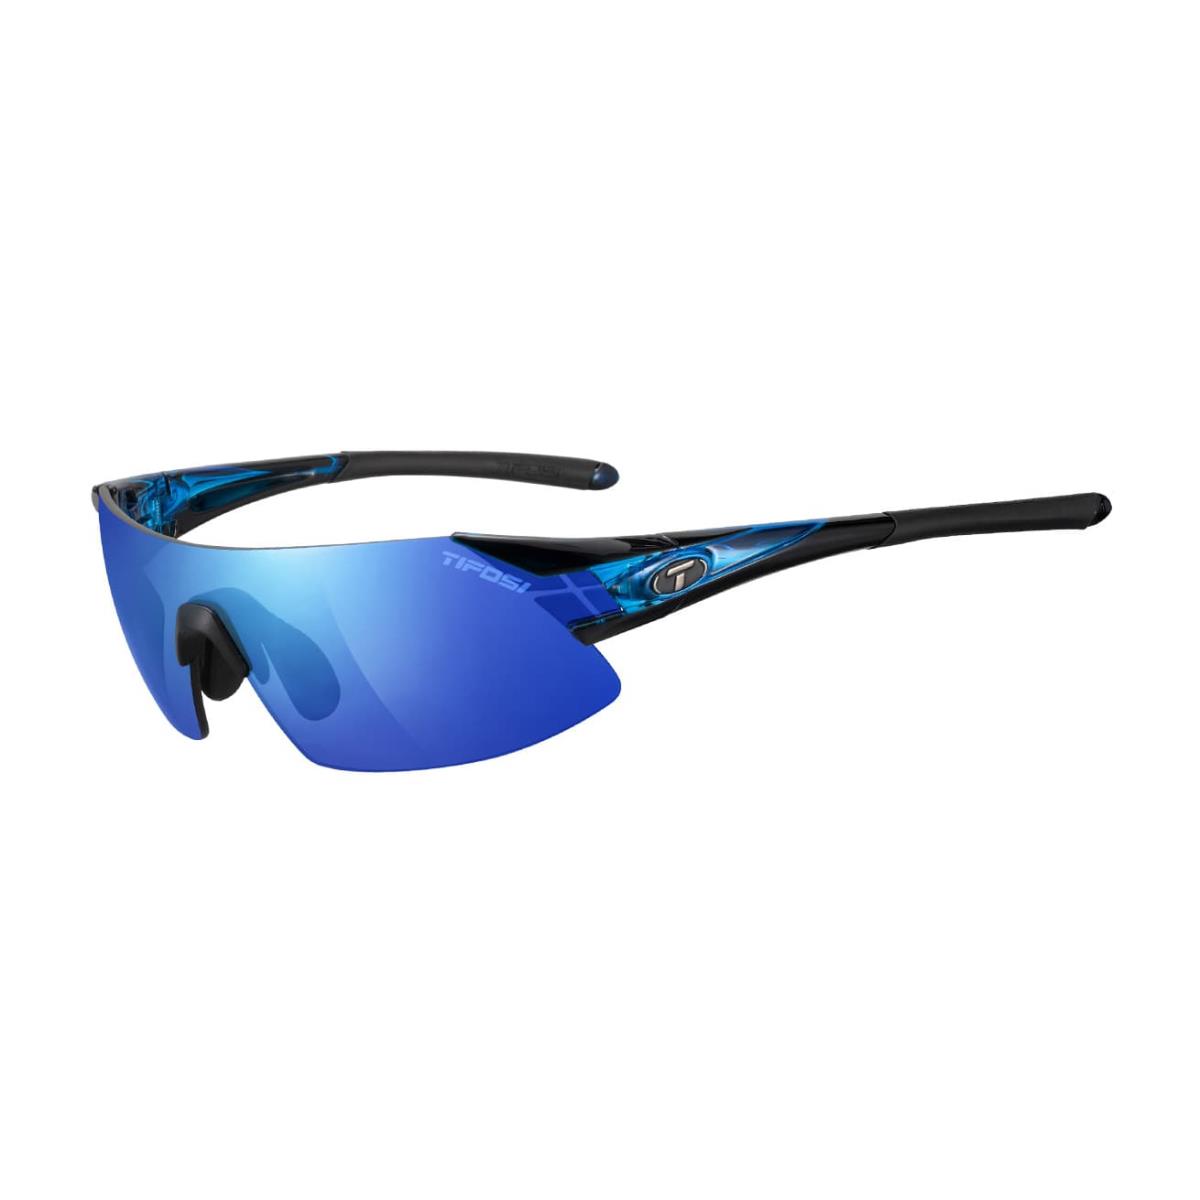 Tifosi Podium Xc Crystal Blue w/ Clarion Blue/AC Red/Clear